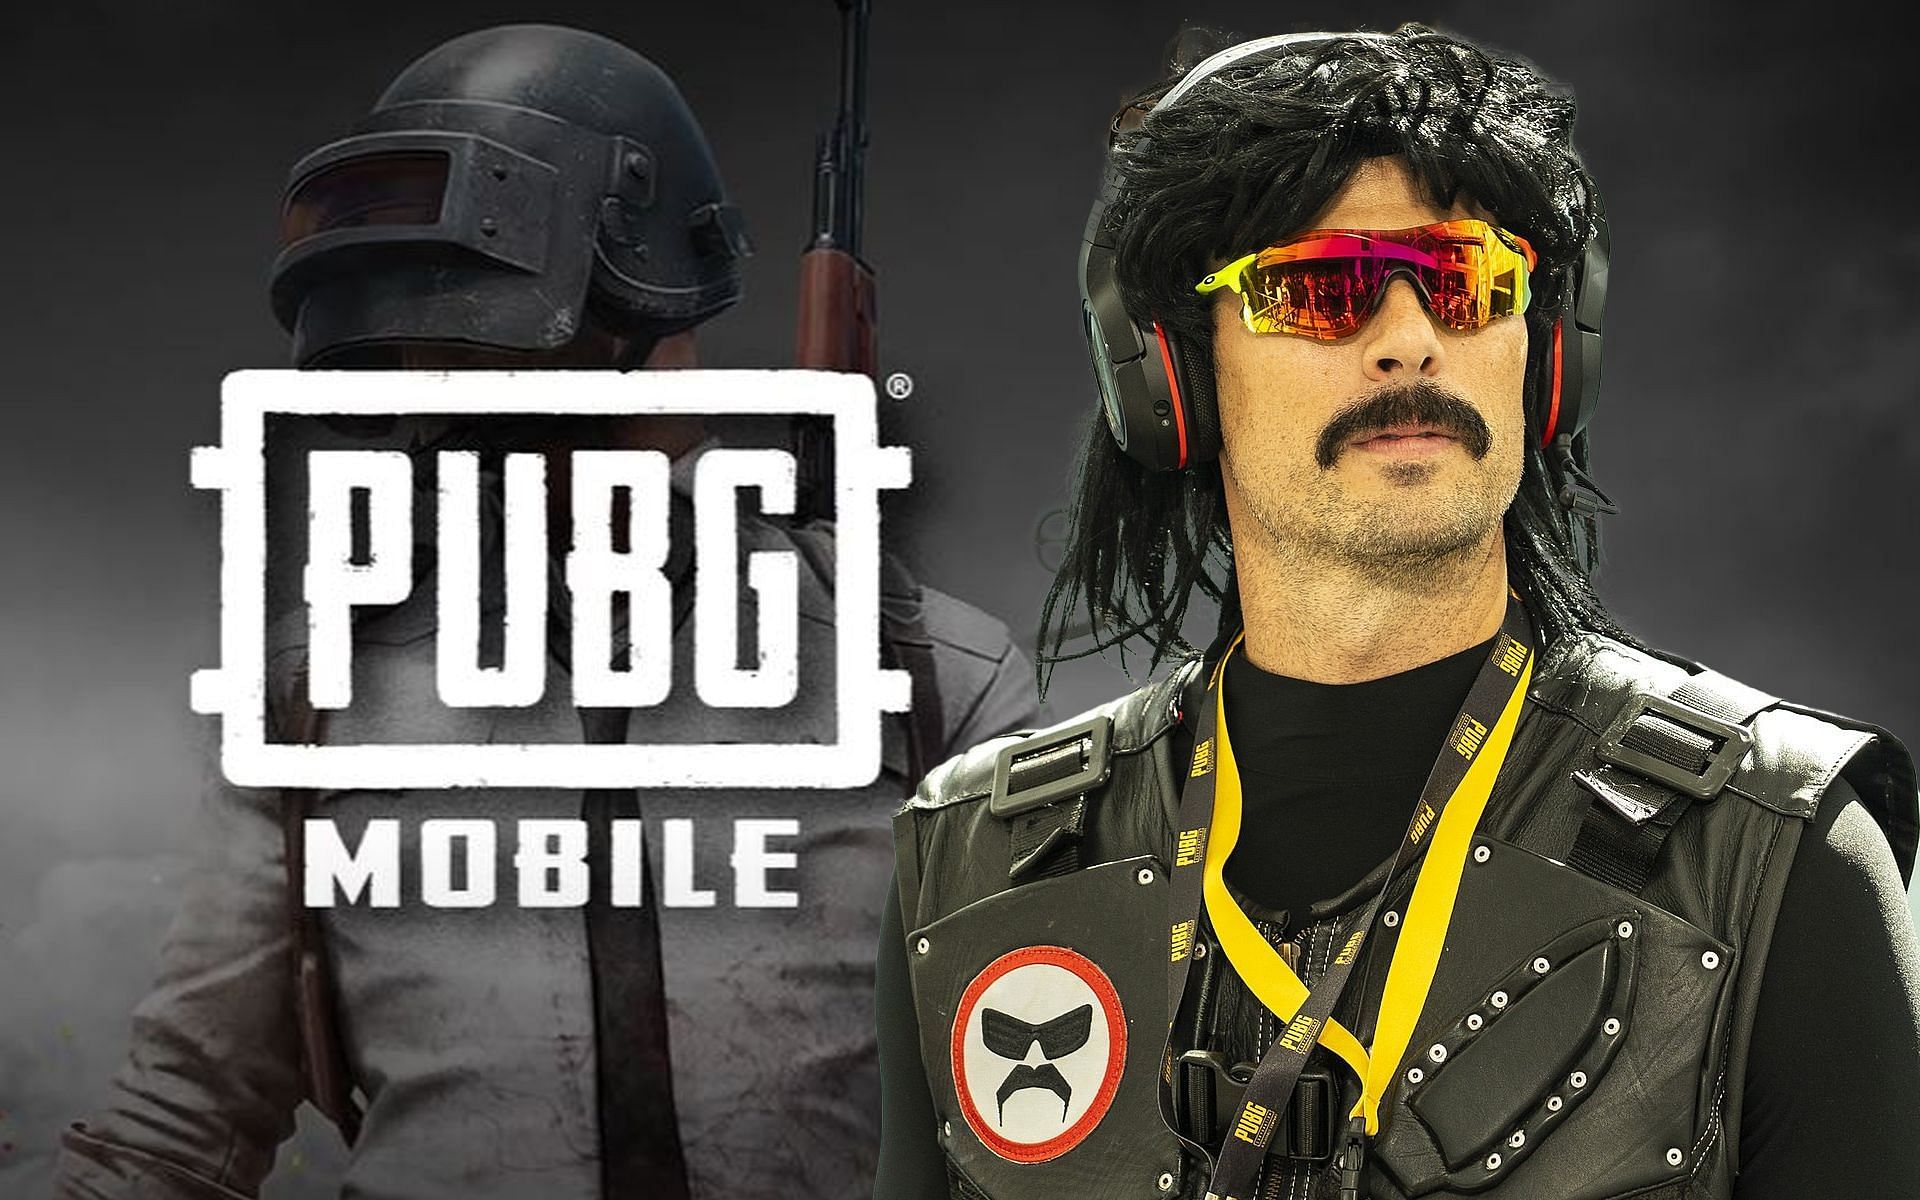 Dr DisRespect has teamed up with PUBG Mobile for the Halloween event (Image via Sportskeeda)